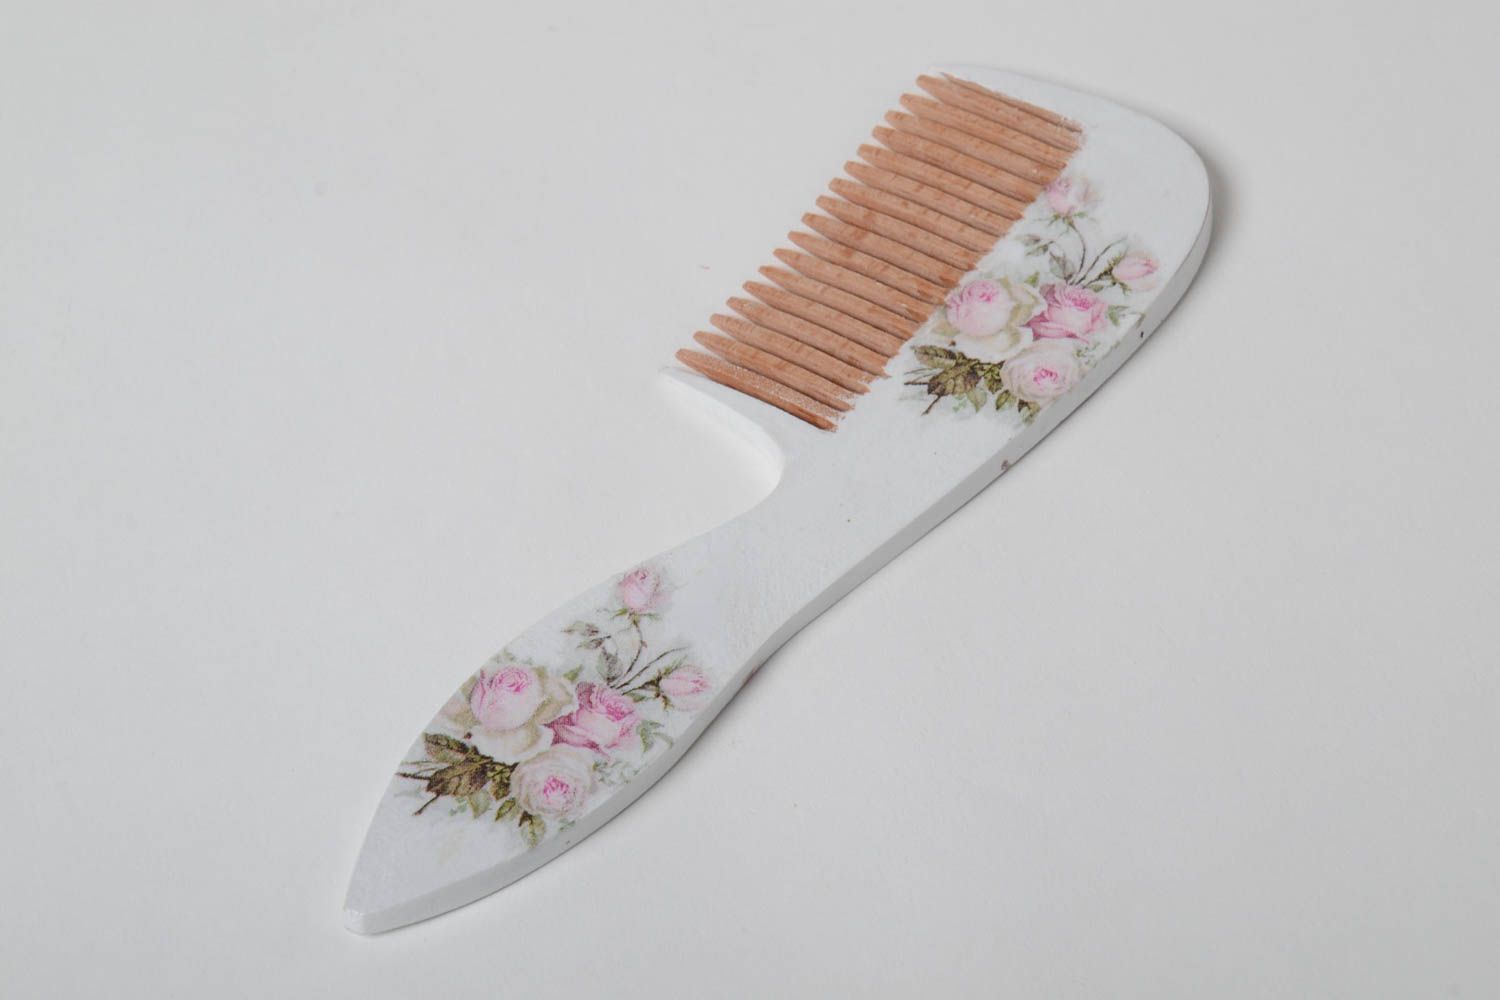 Handmade wooden comb stylish accessories flower beautiful present for girls photo 3